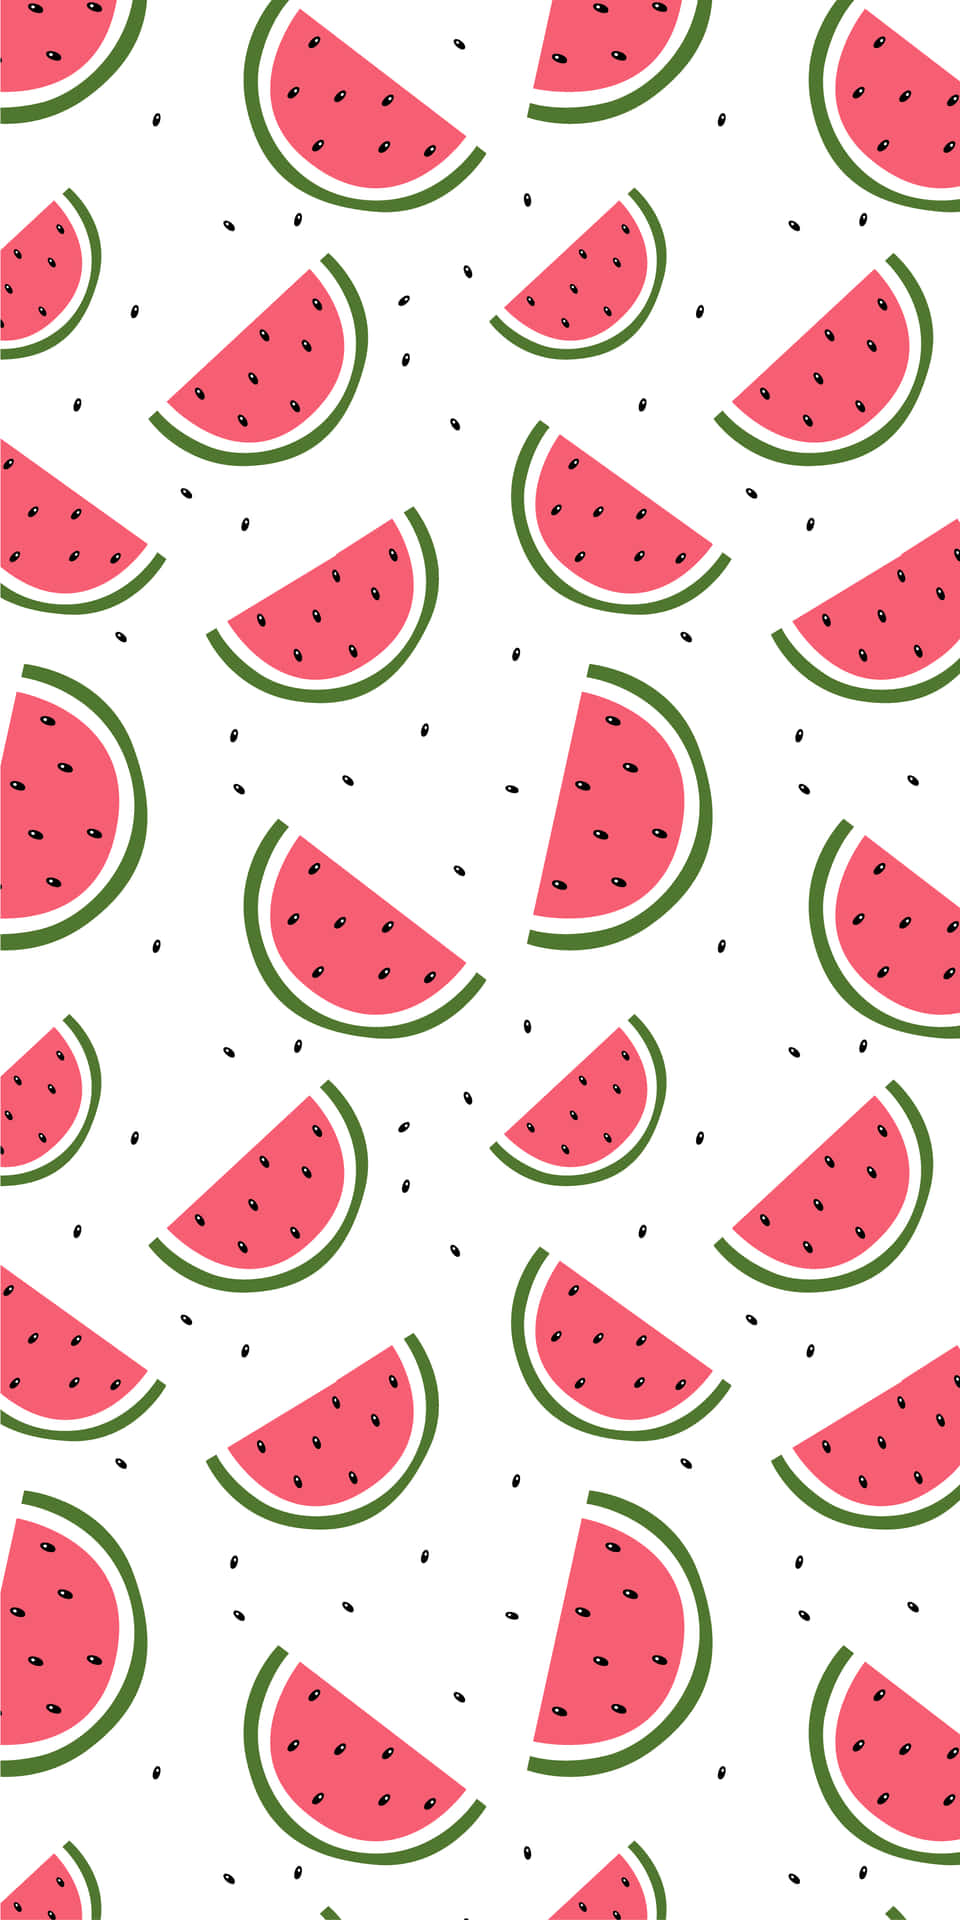 Image  Keep Your Phone Cool with a Watermelon Iphone Case Wallpaper